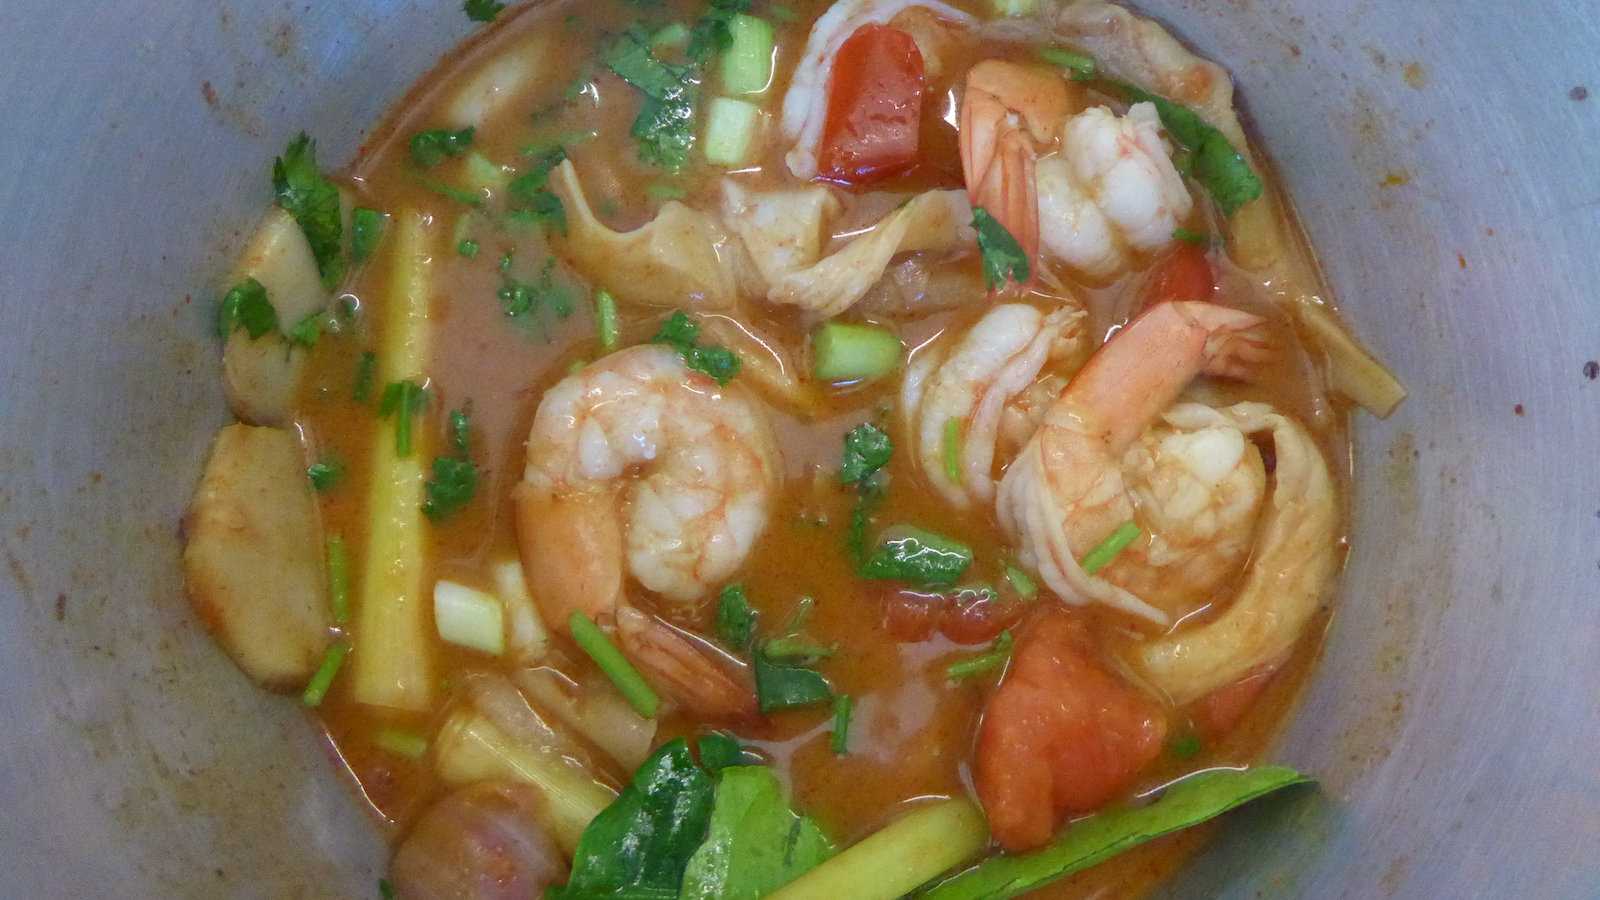 Tom yum goong is a popular Thai hot and sour soup with prawns